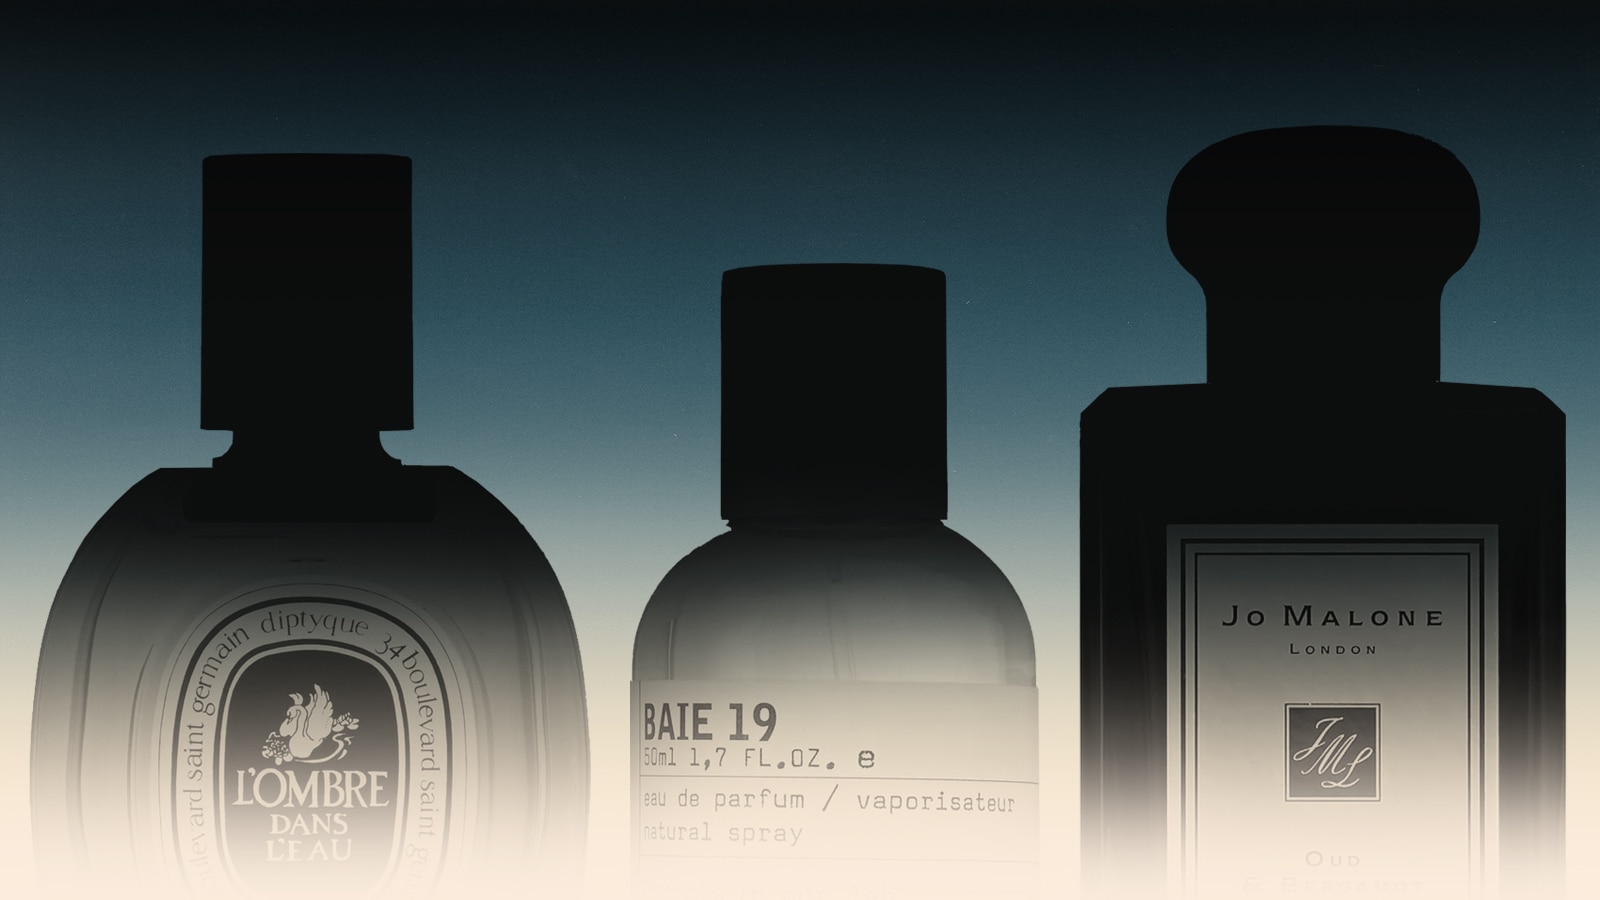 9 Of The Best Chanel Cologne For Men To Add To Your Grooming